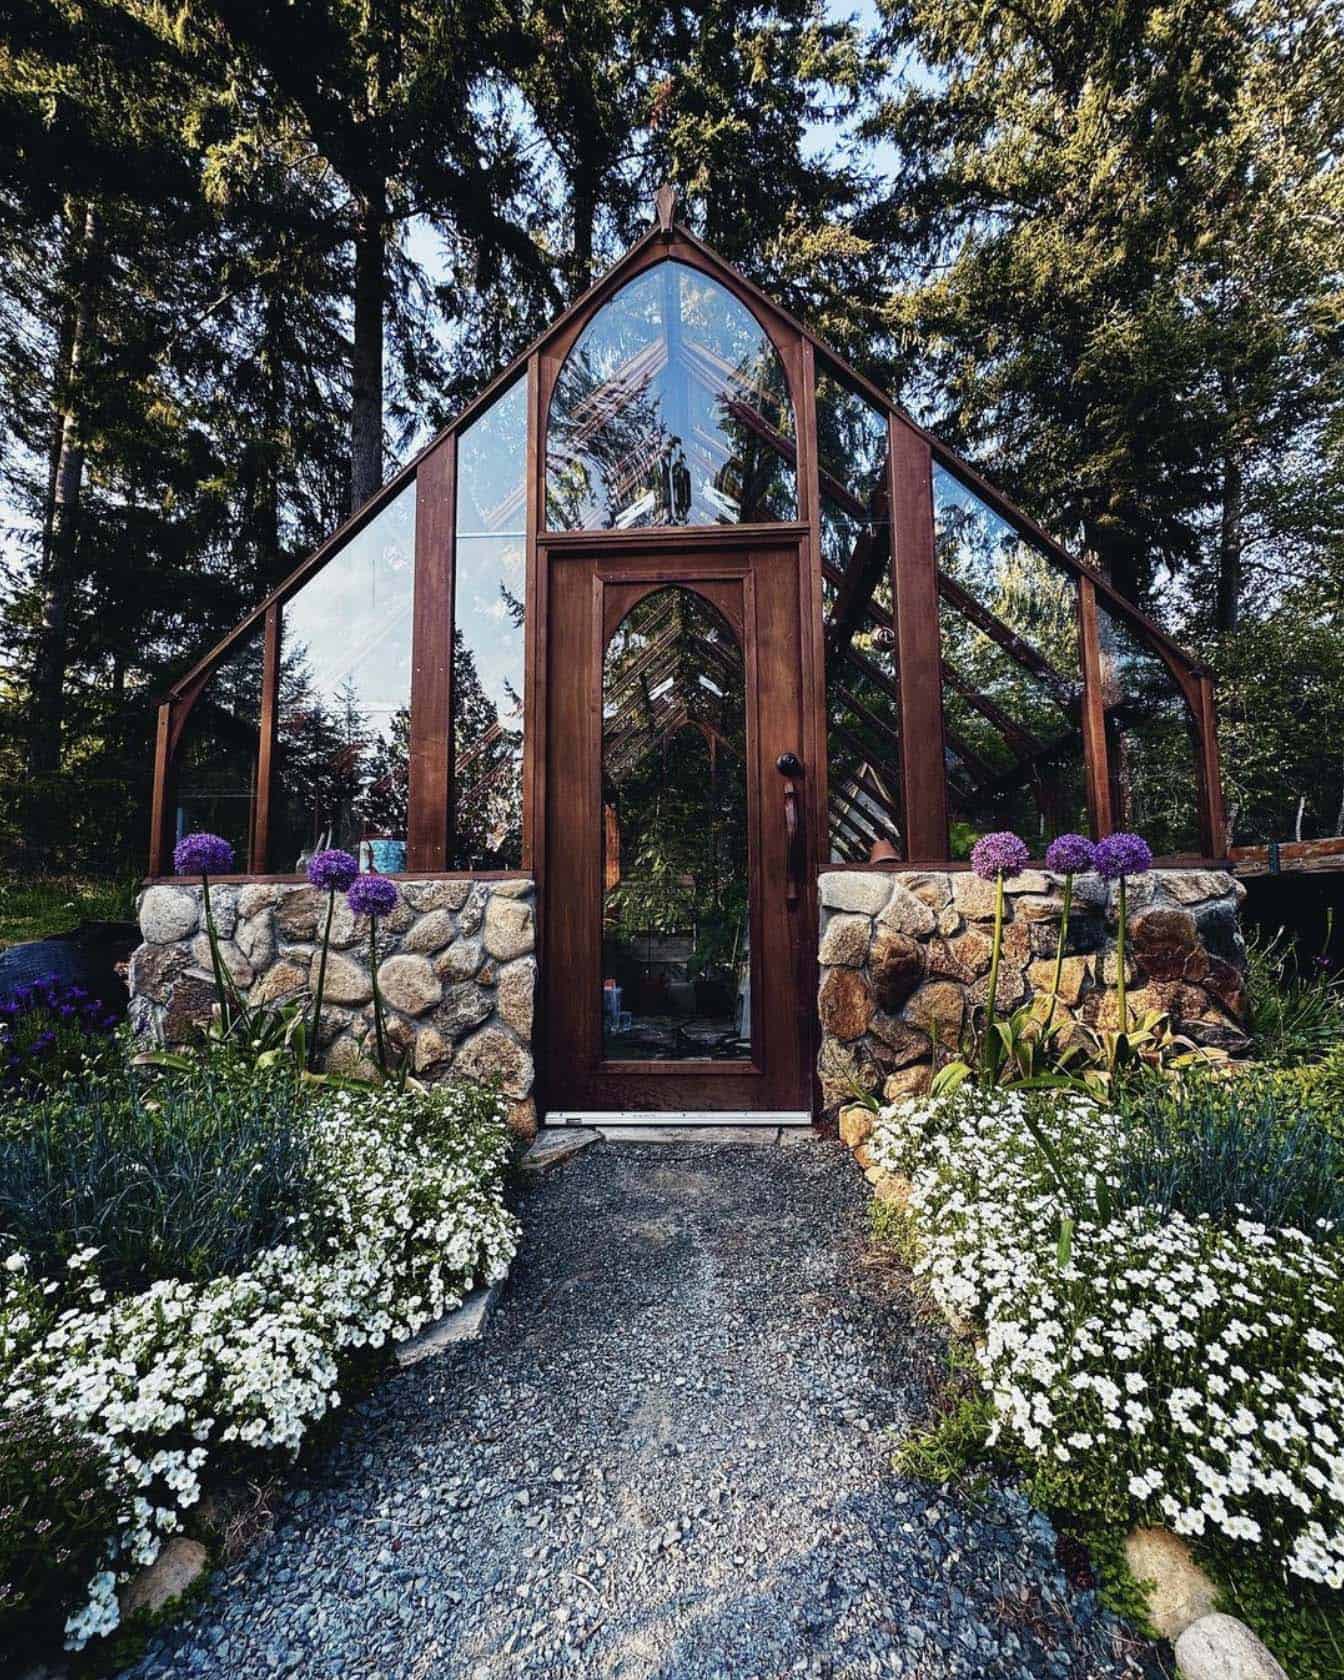 wood and glass greenhouse surrounded by flowers